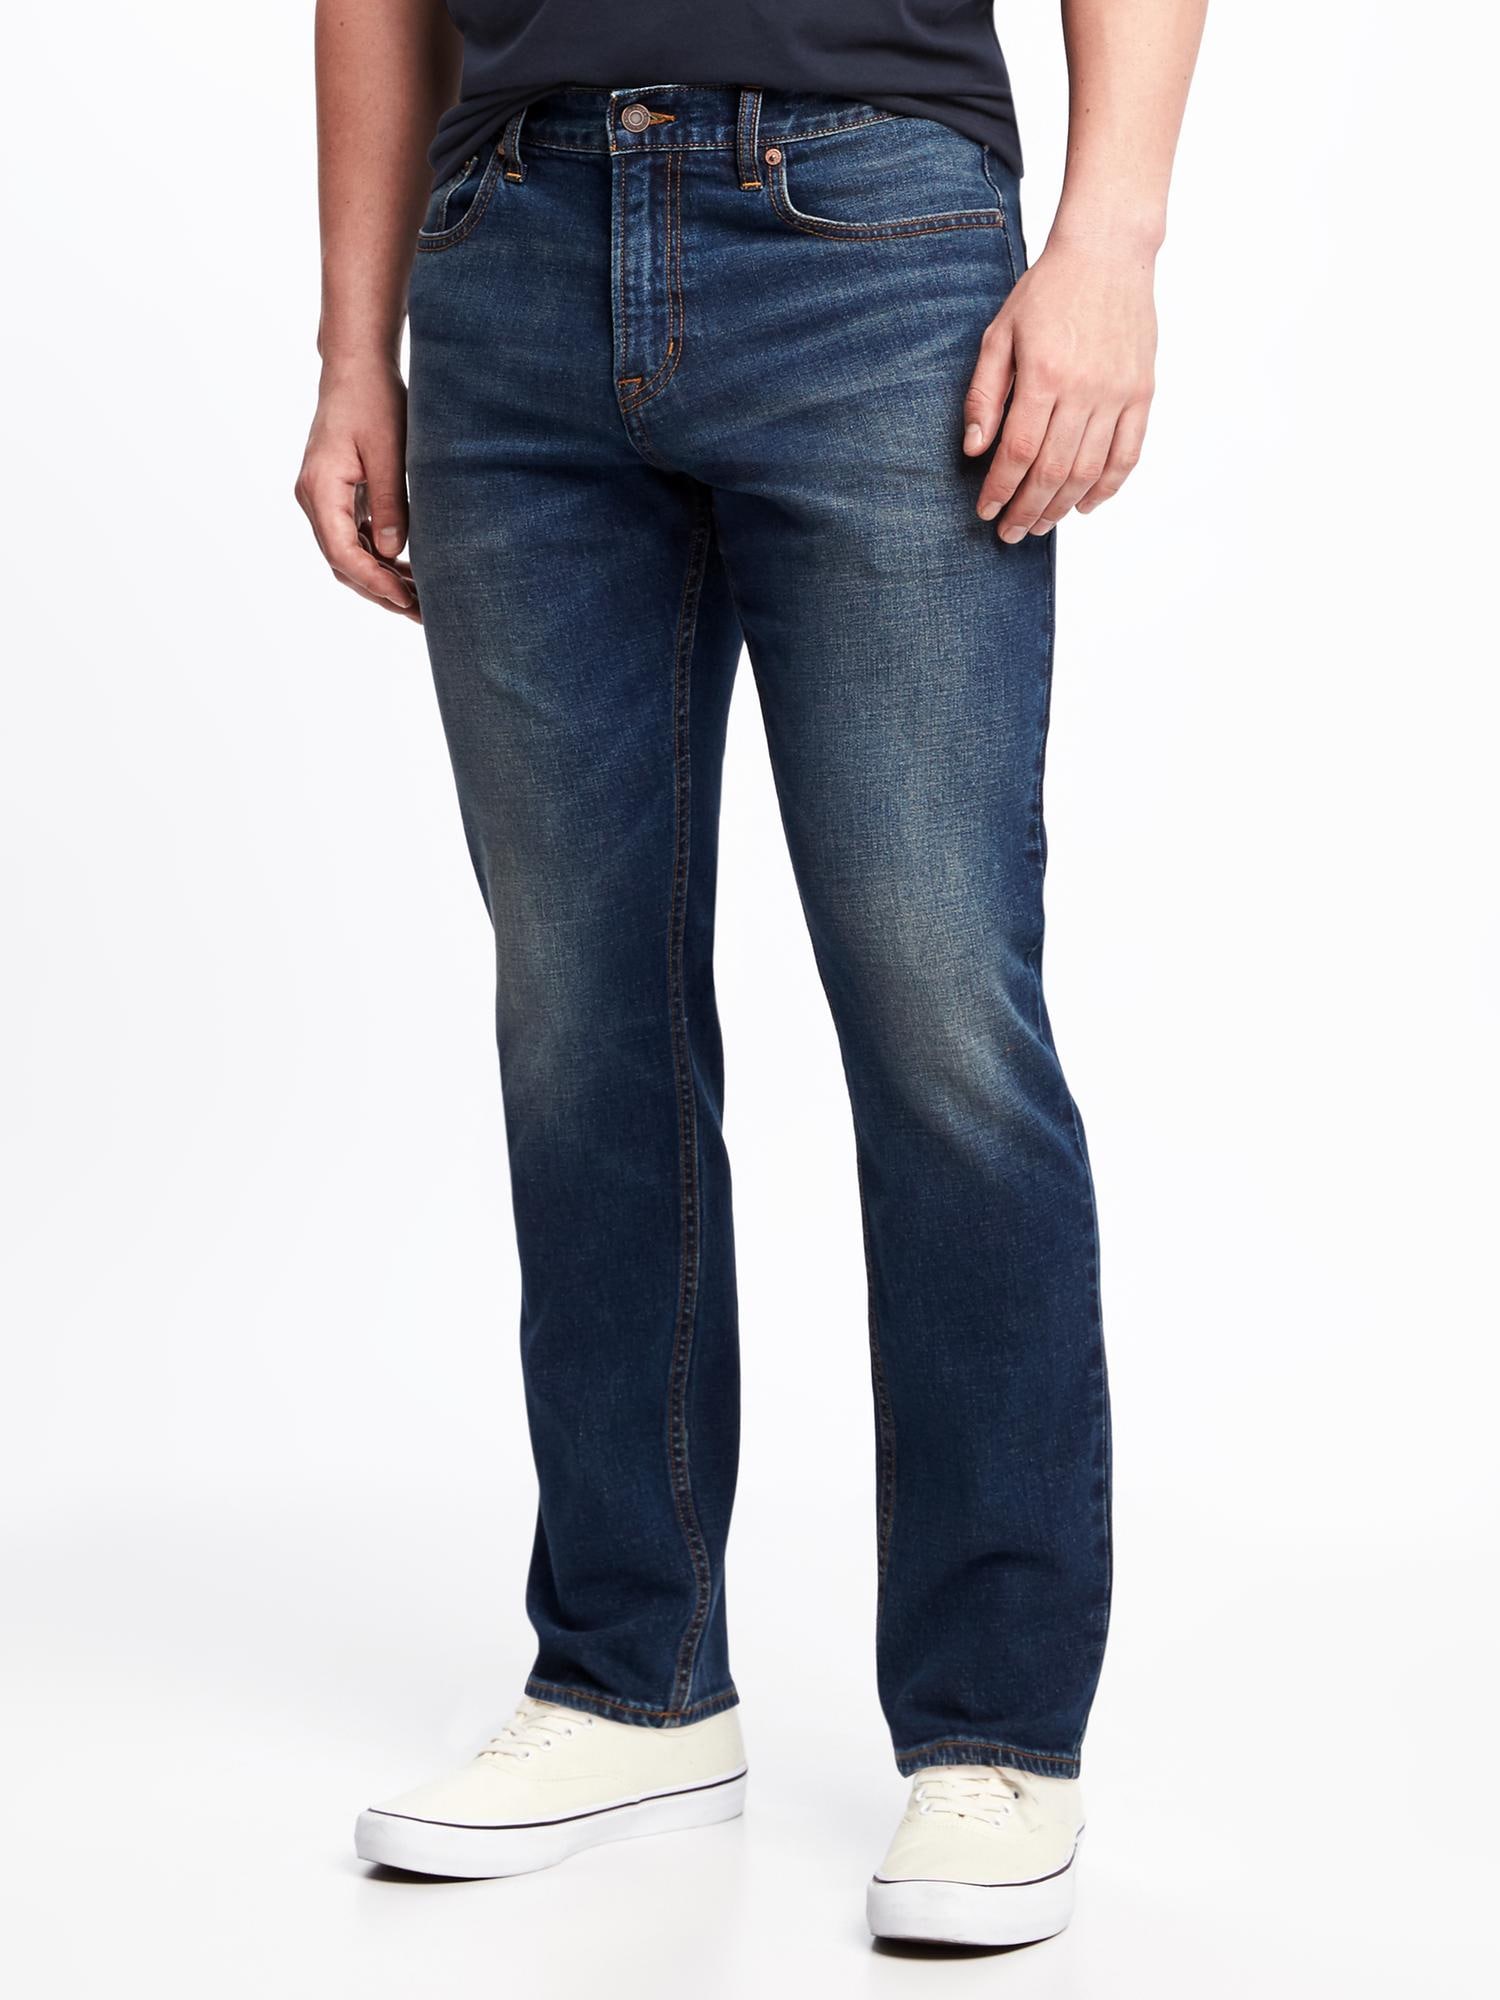 old navy canada mens jeans